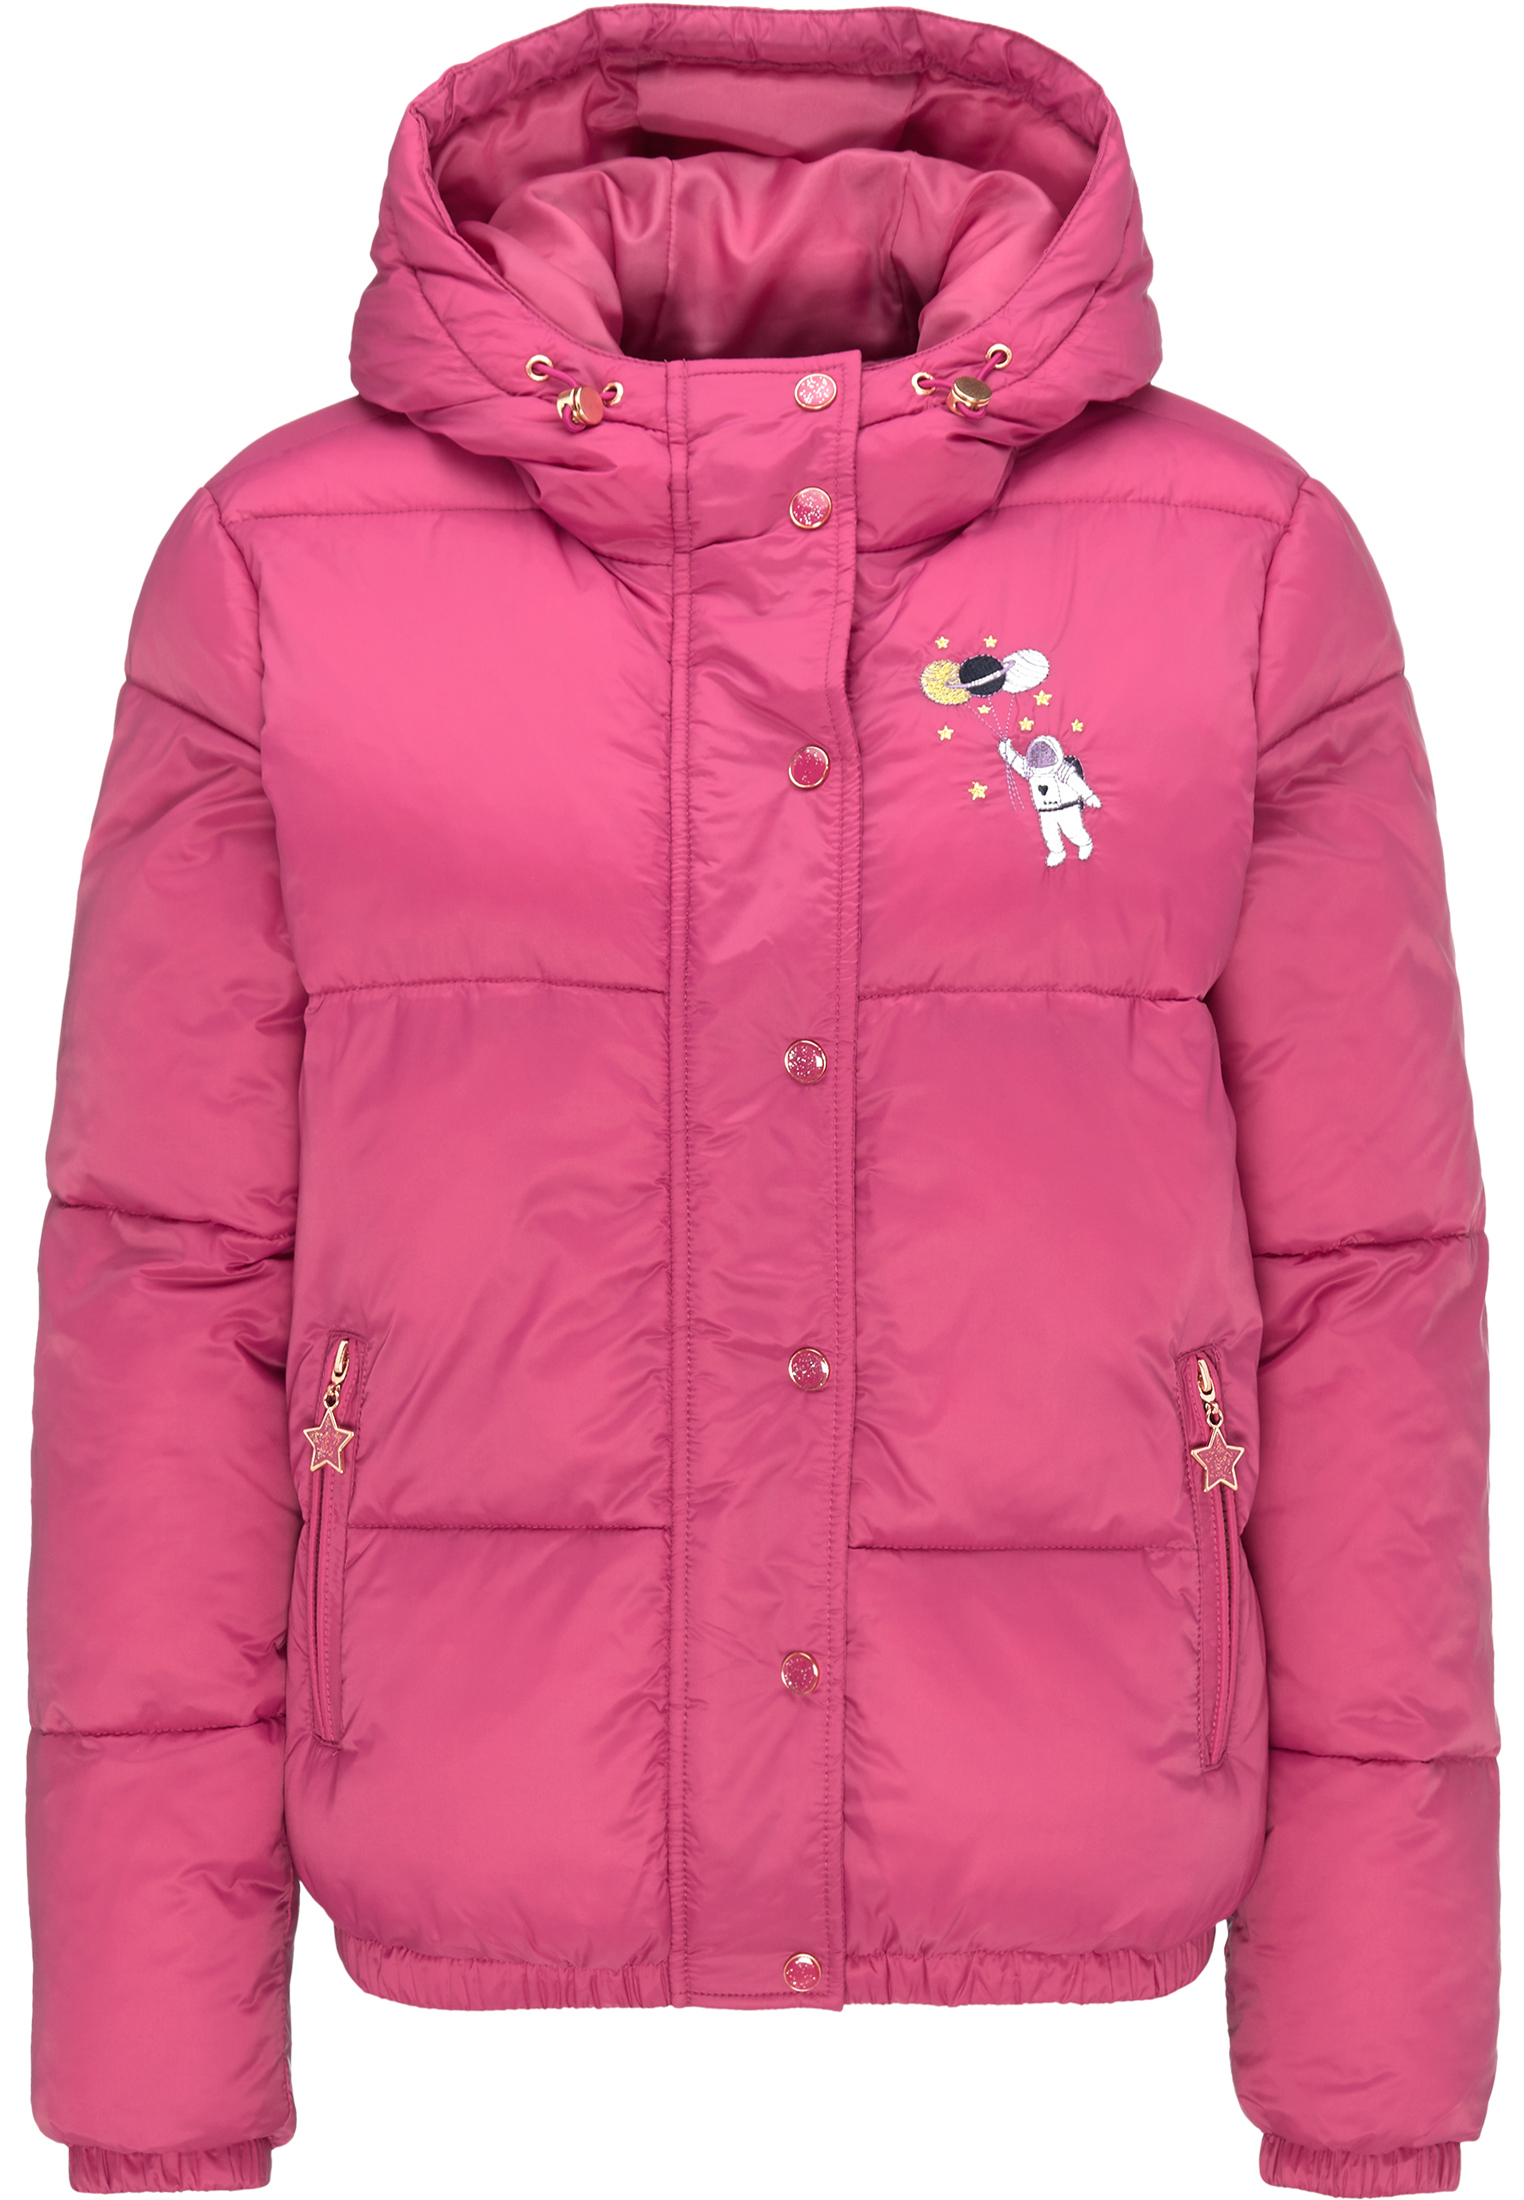 Donna PROMO MYMO Giacca invernale in Rosa 